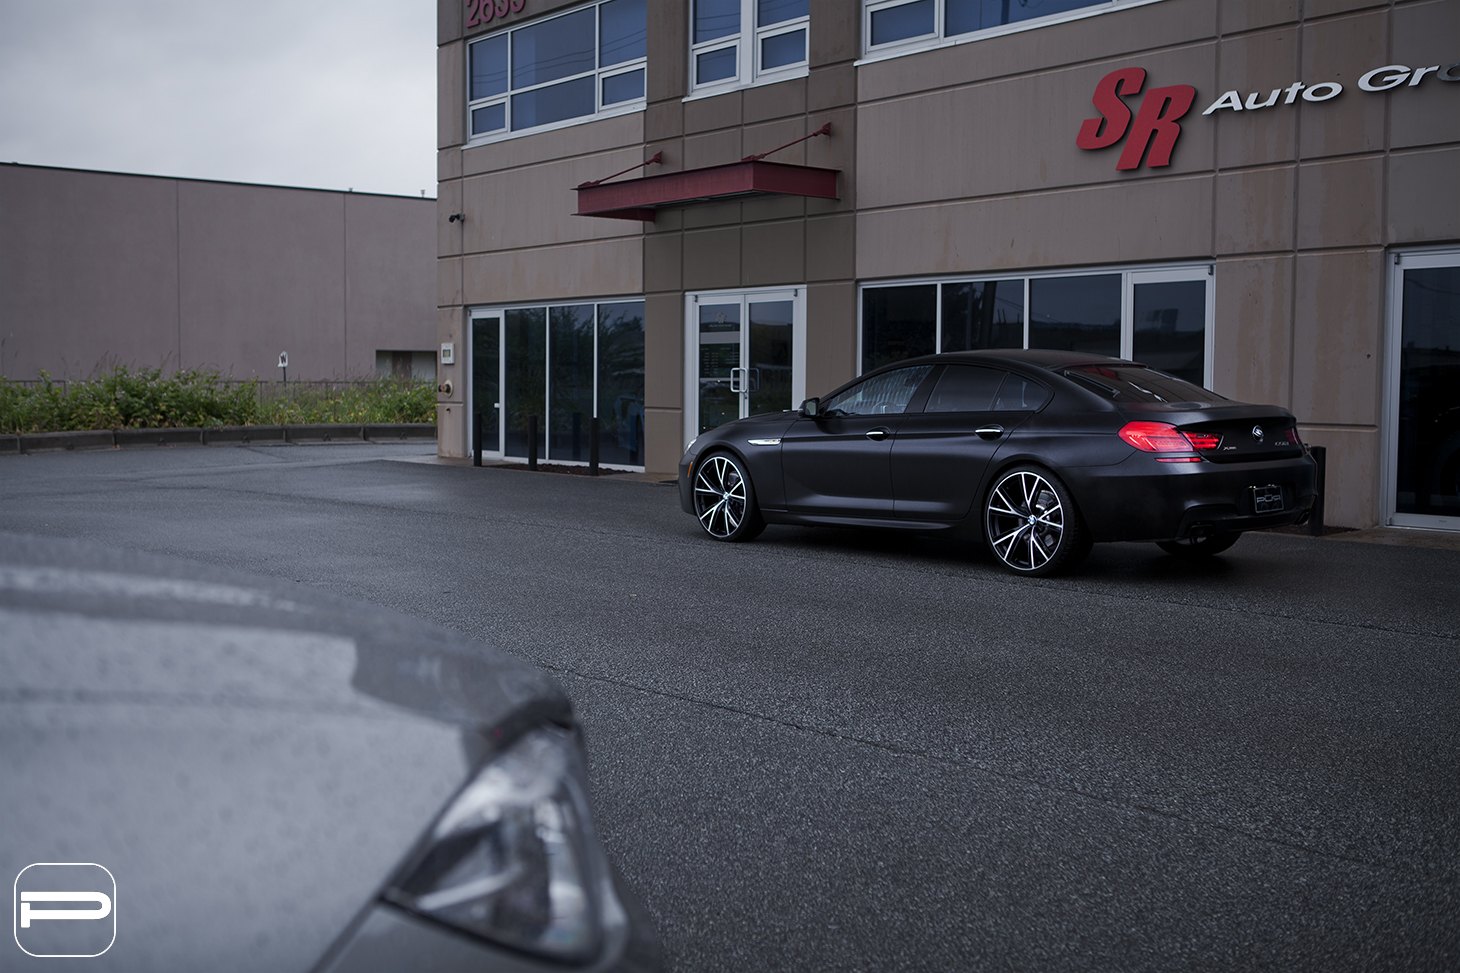 Aftermarket Side Skirts on Black BMW 6-Series - Photo by PUR Wheels